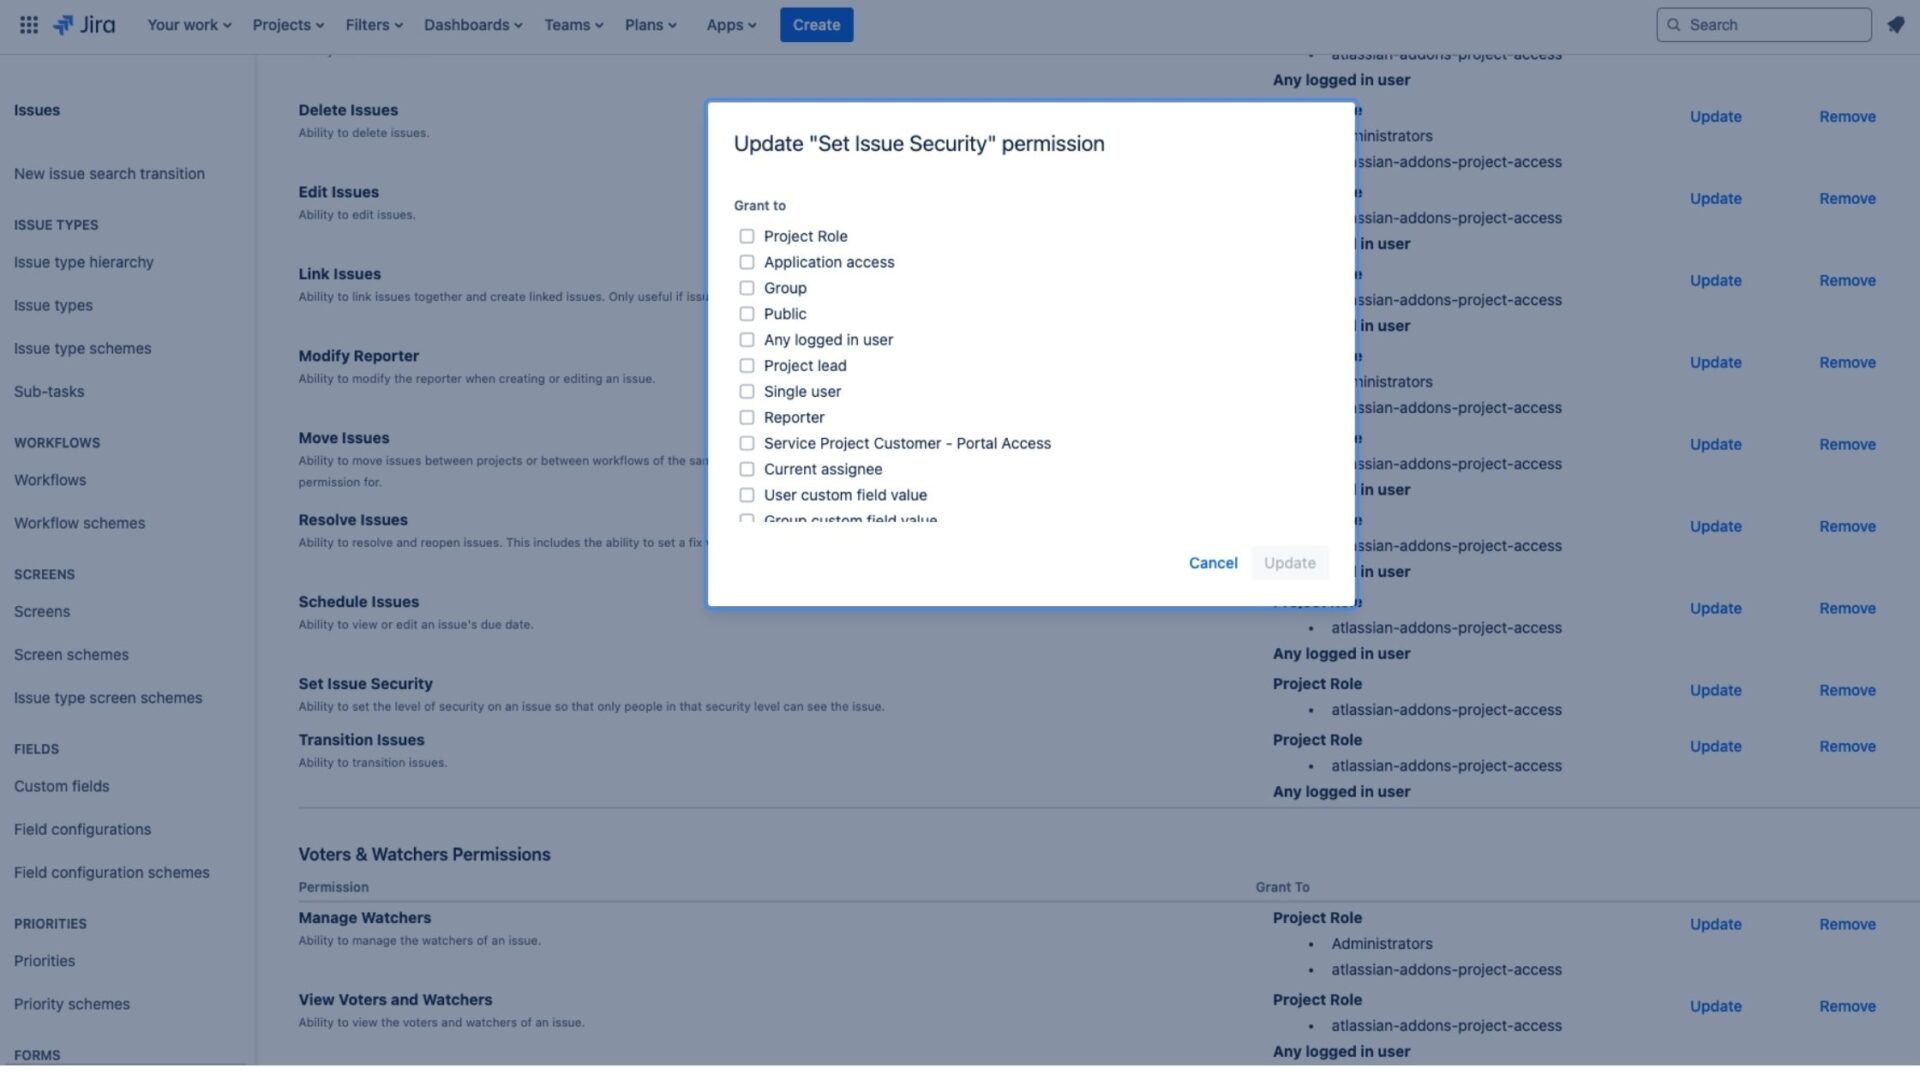 configure issue security schemes in Jira